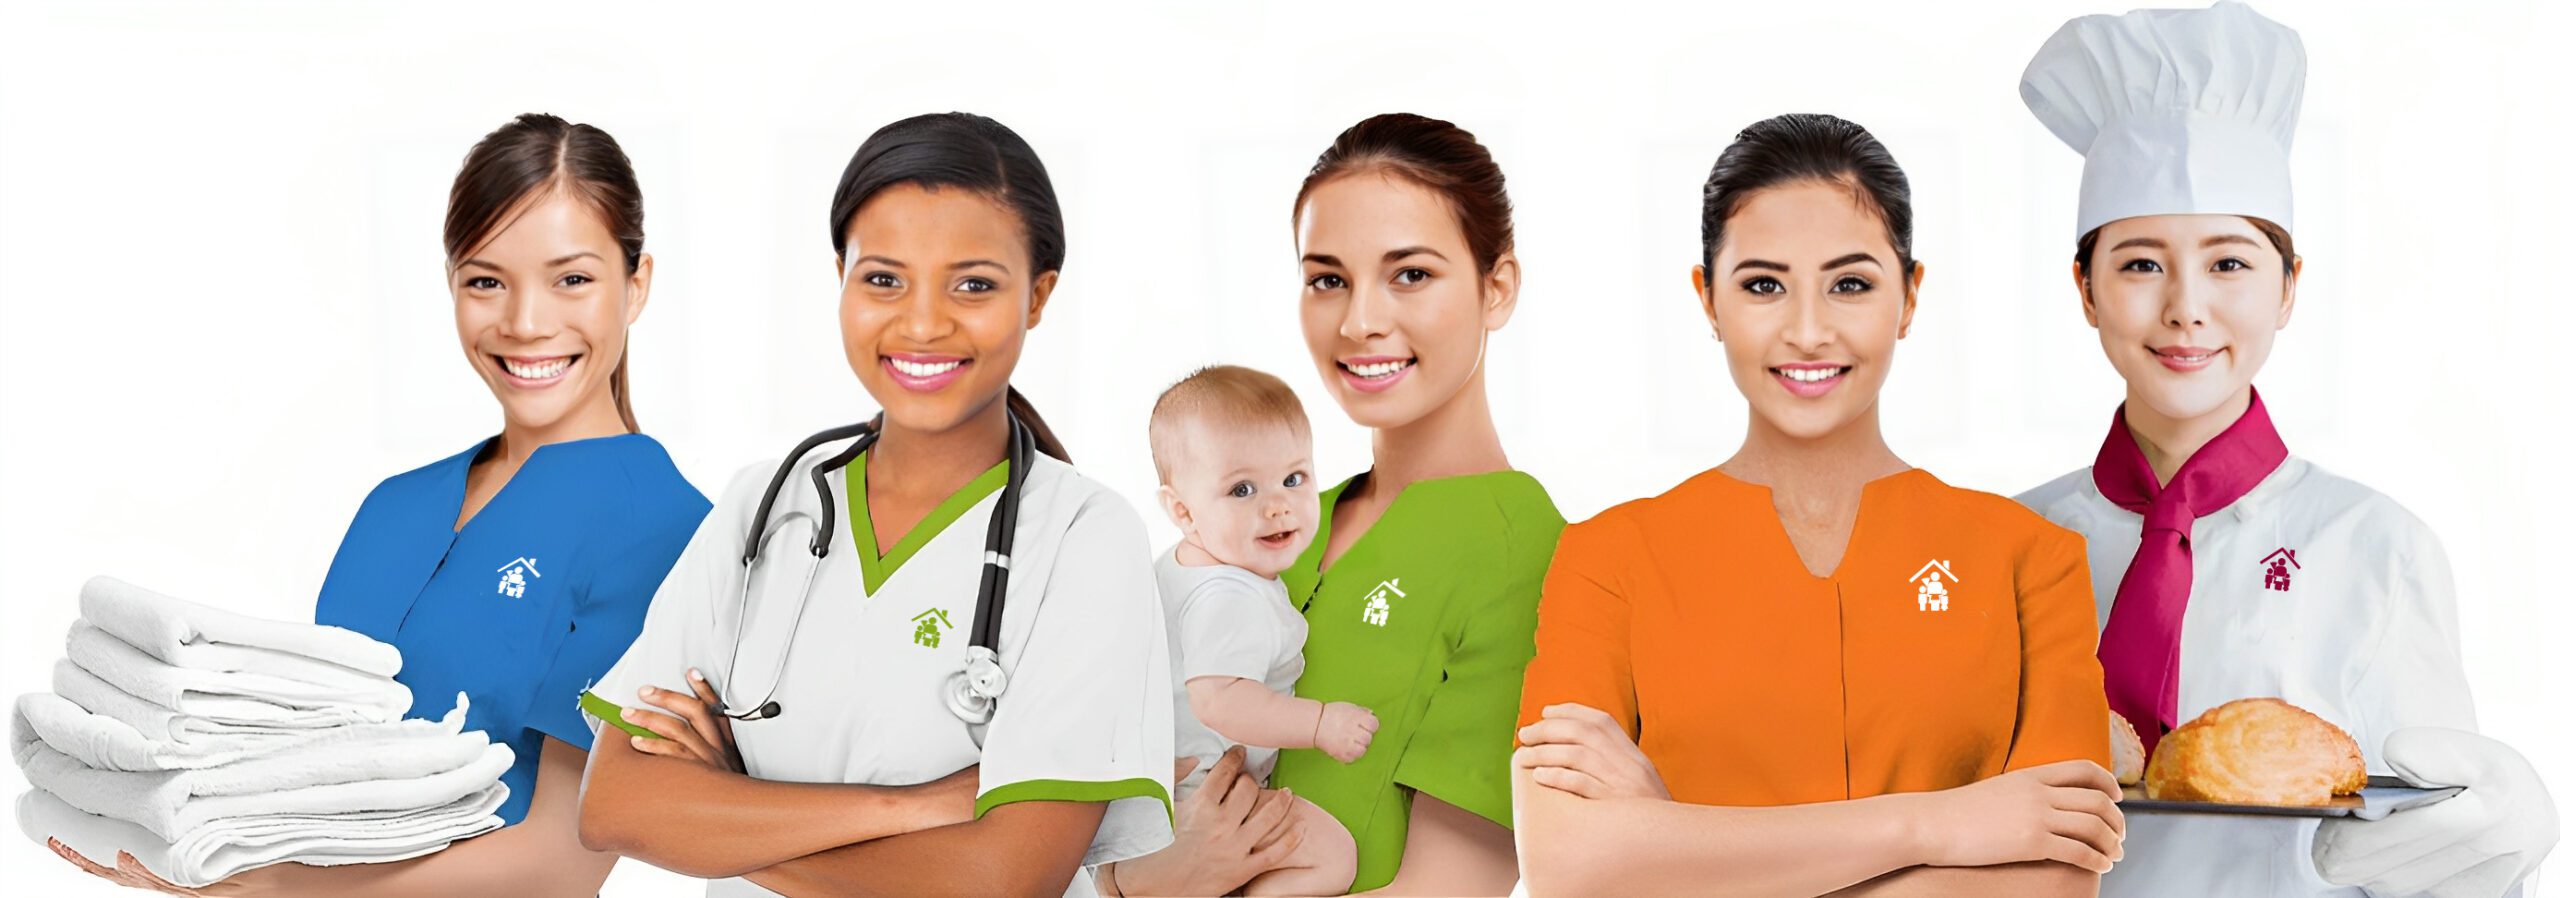 Comprehensive Household Services in Qatar - Lady Cook, Nanny, Lady Driver, Private Tutor, and Indian Driver.